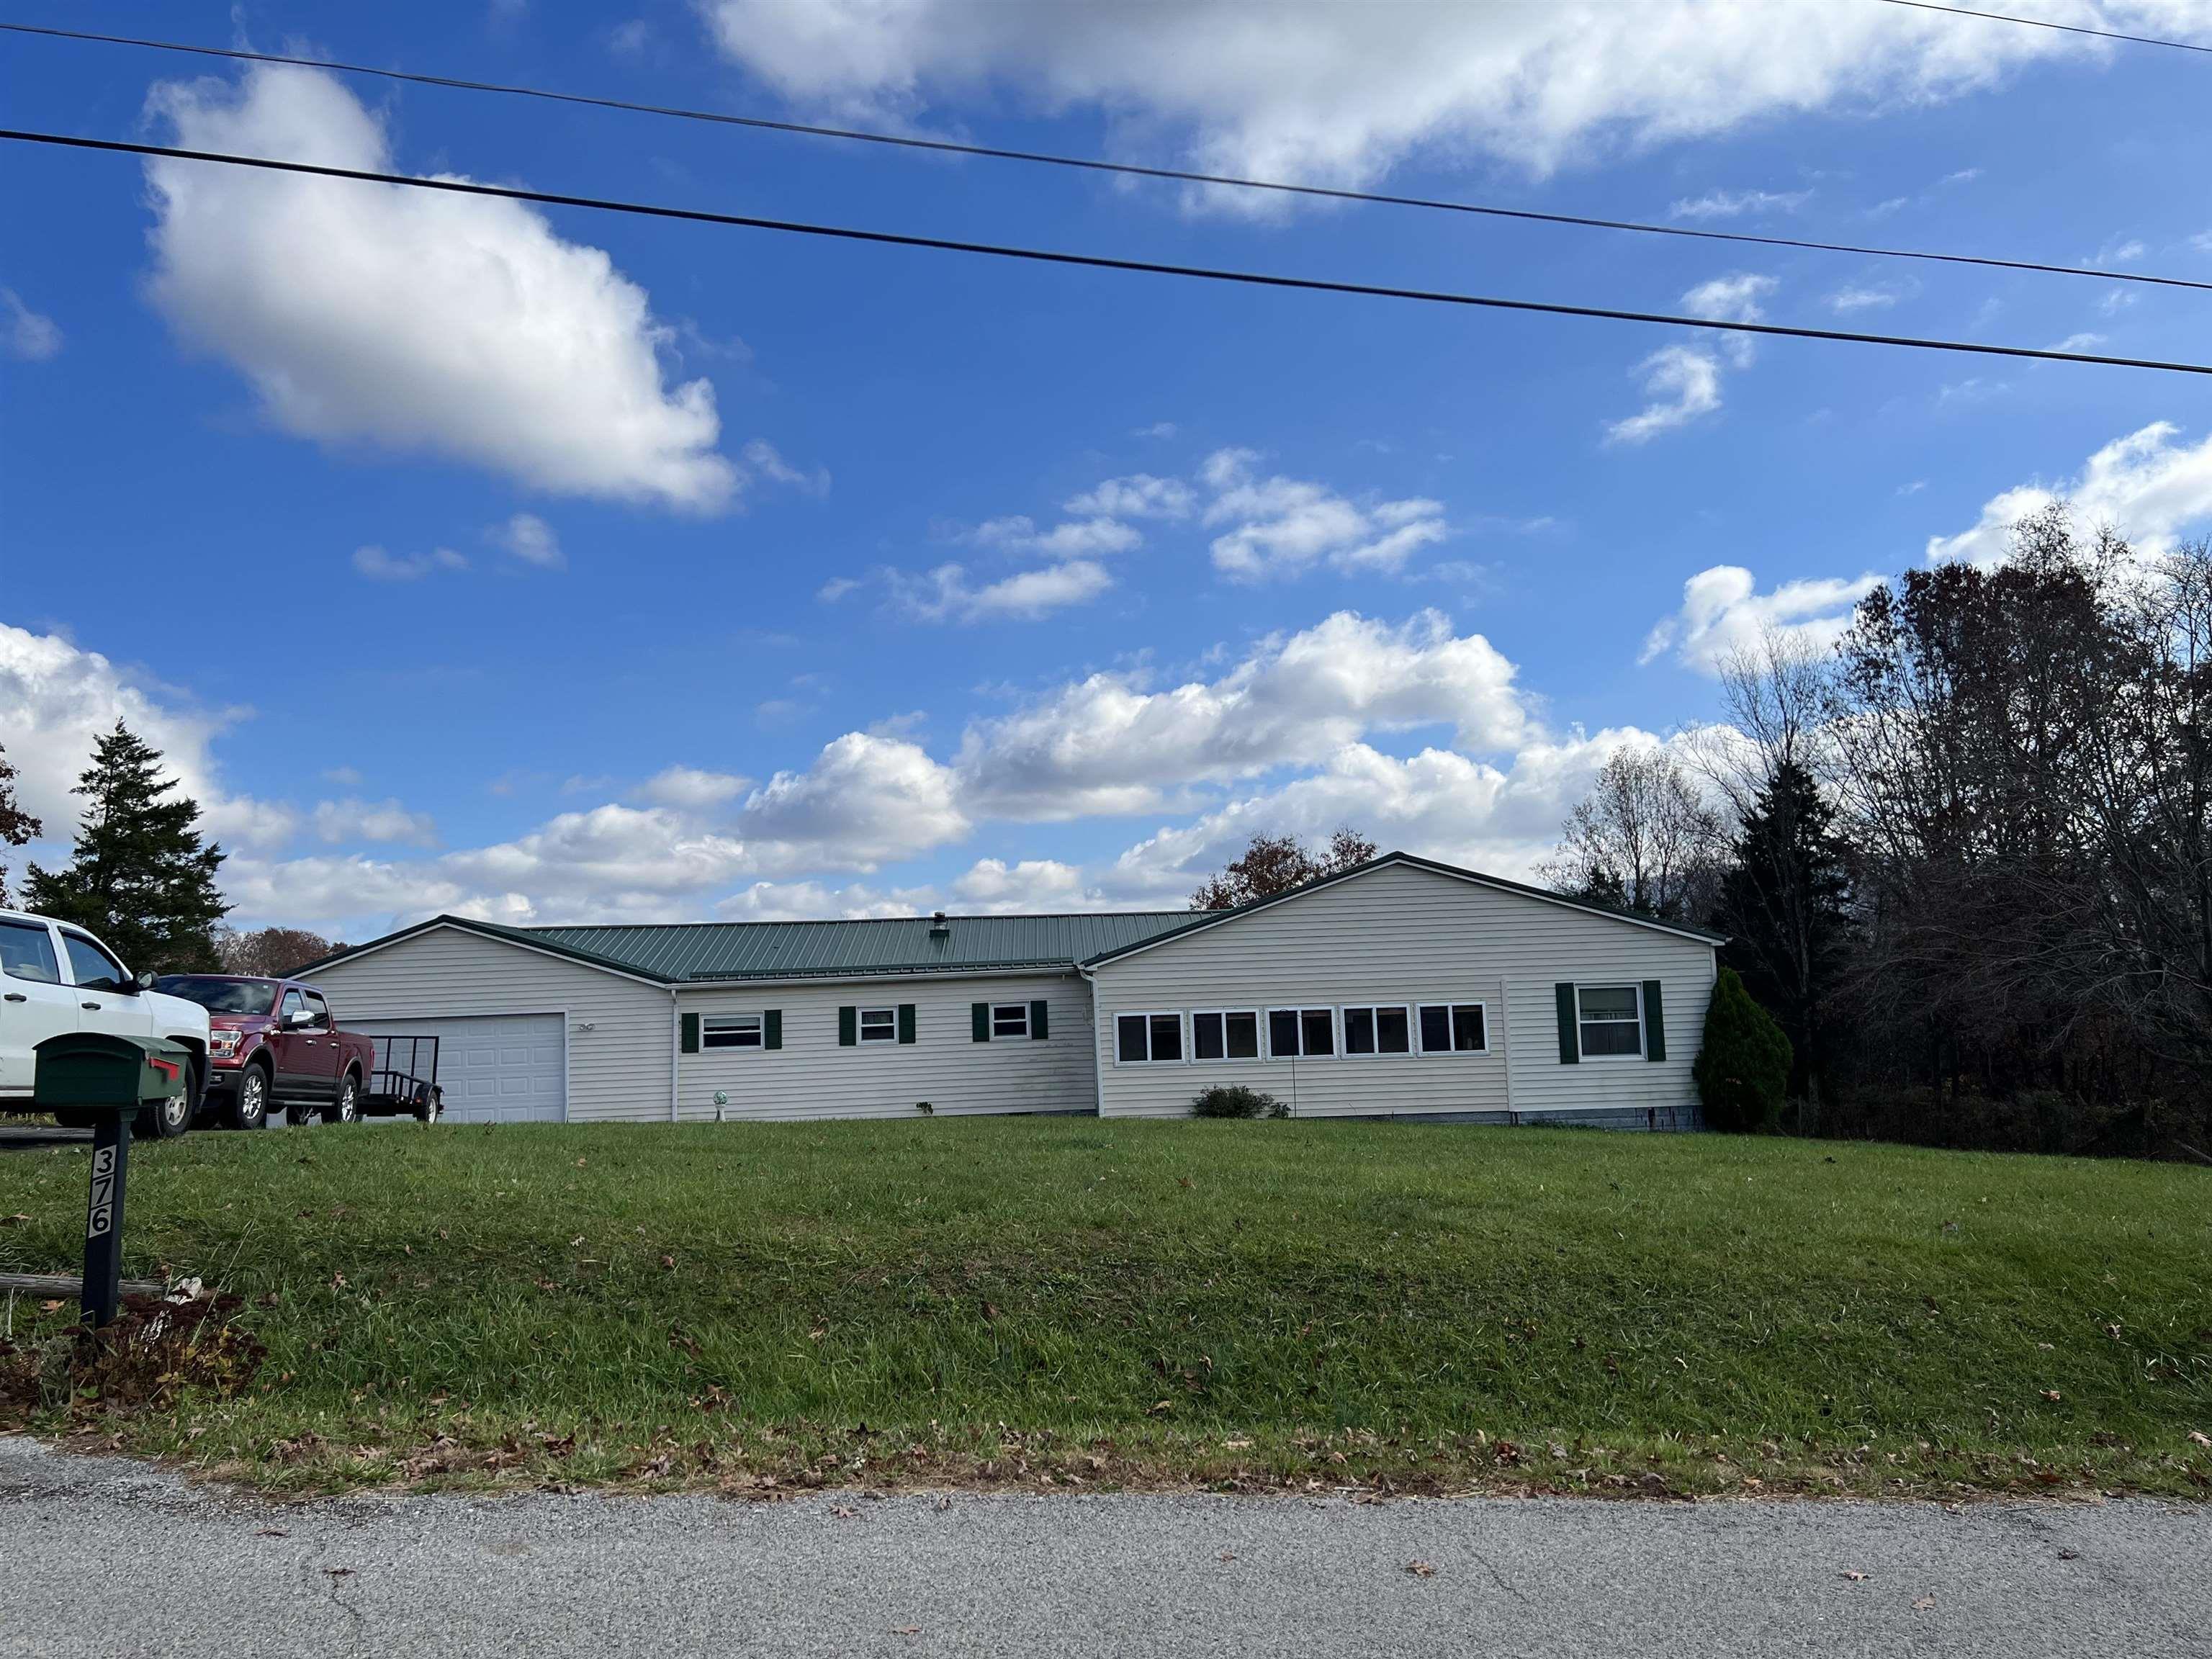 What a View!!! This Beautiful 3 Bedroom 2 Bath Ranch Home Offers a Great Layout, with an Attached 2 Car Garage.. The Home sits on a .72 Acre lot that Lays Great. The Home has a Paved driveway and is only about 15 Minutes to Blacksburg.